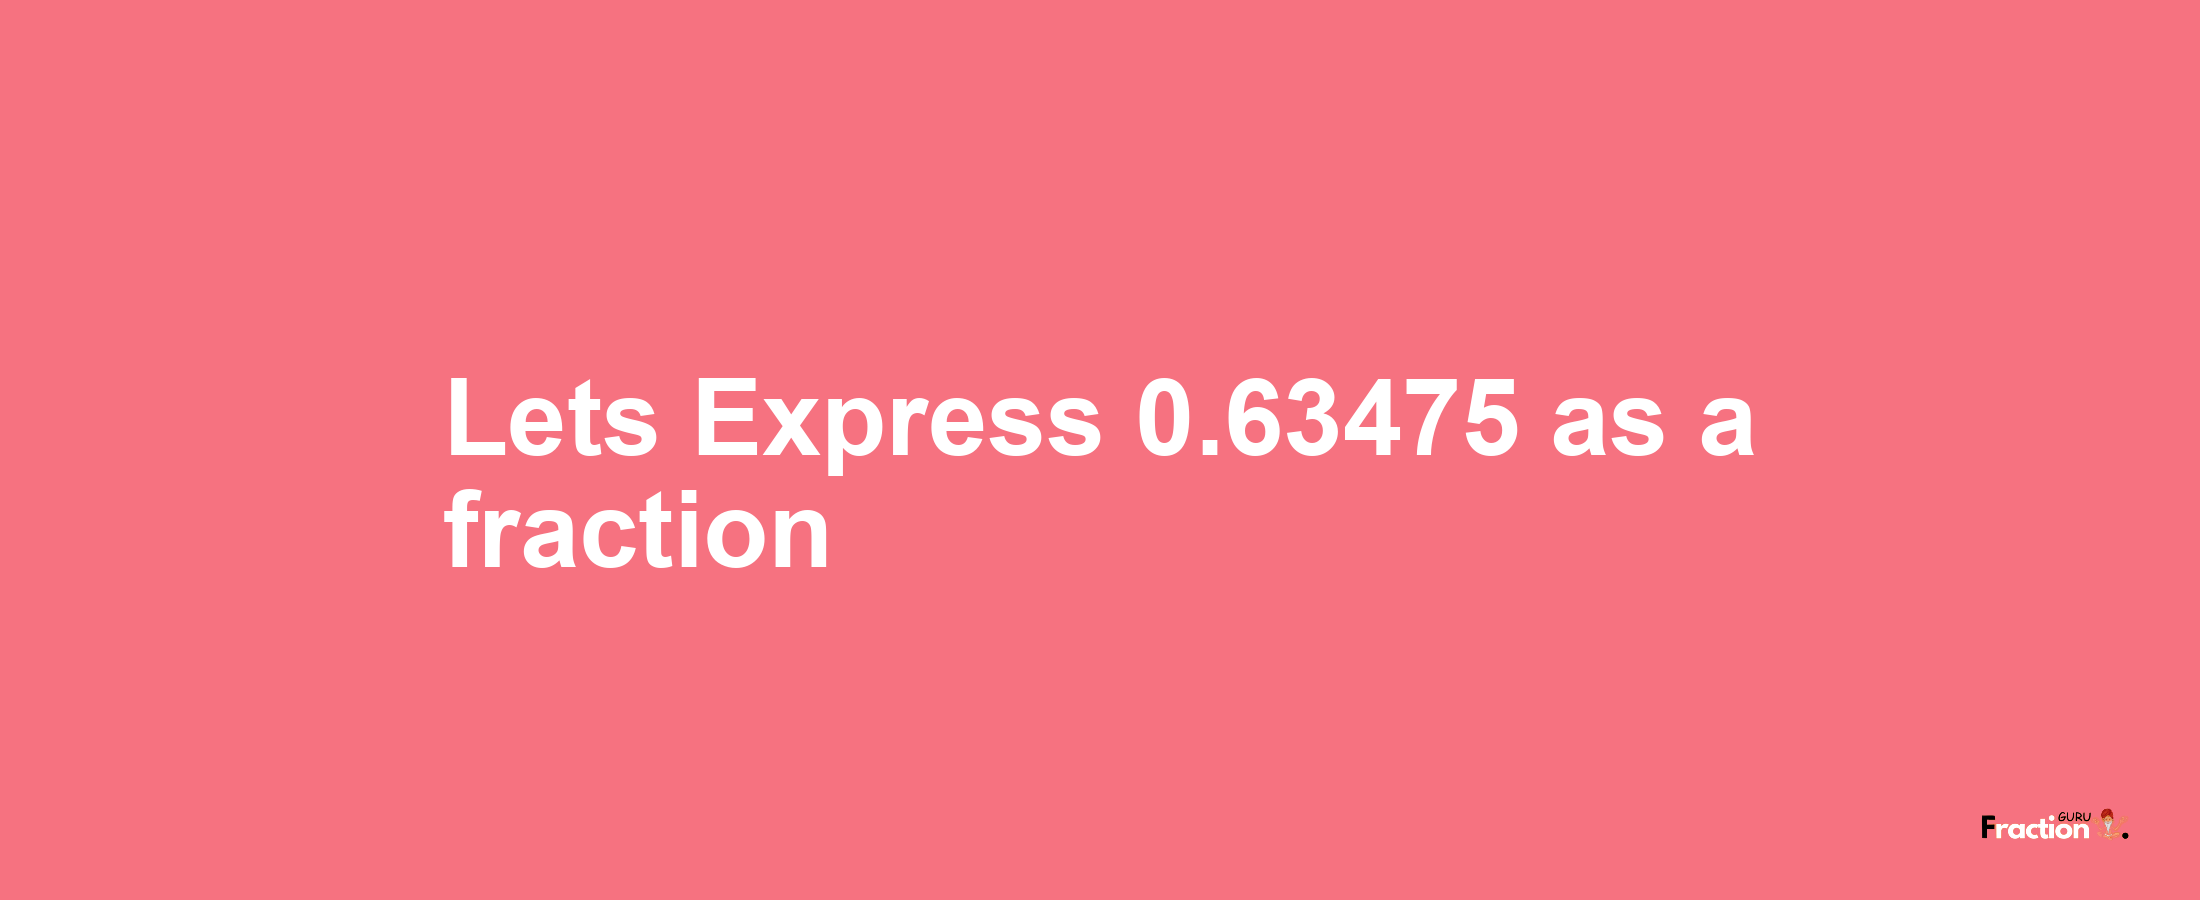 Lets Express 0.63475 as afraction